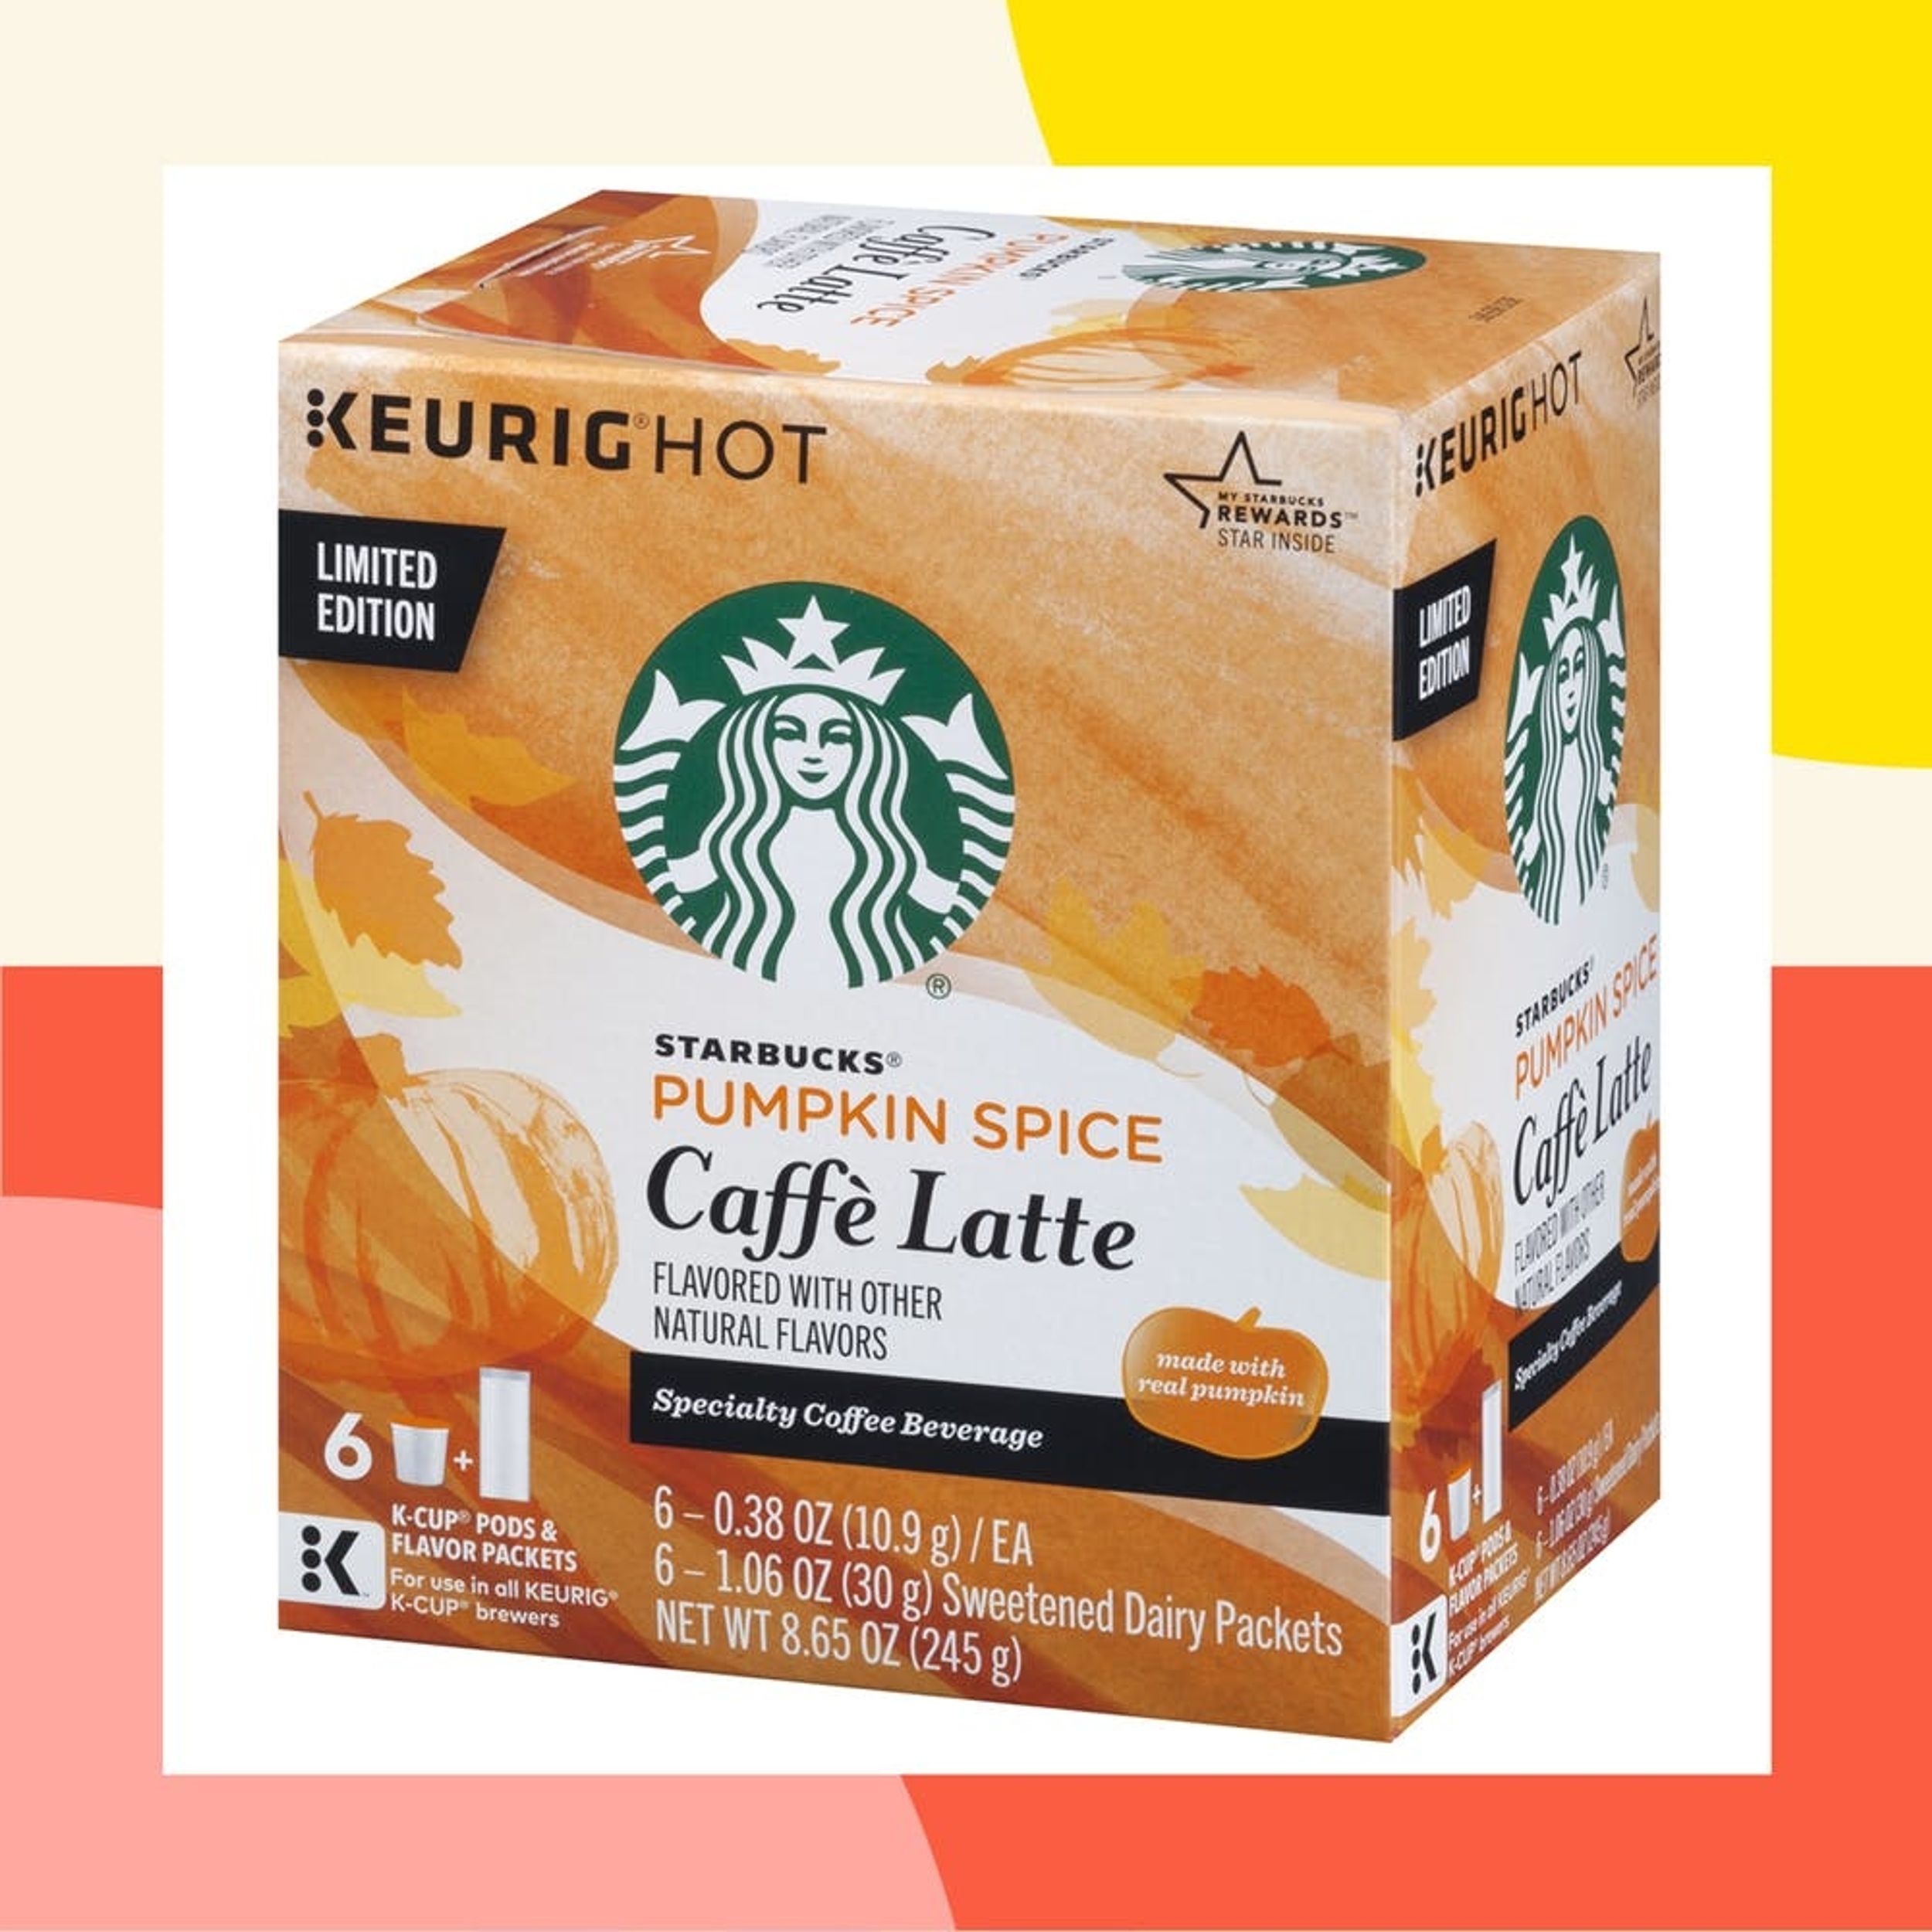 Starbucks Pumpkin Spice Latte Products Are Officially Hitting Store Shelves Oh-So Soon